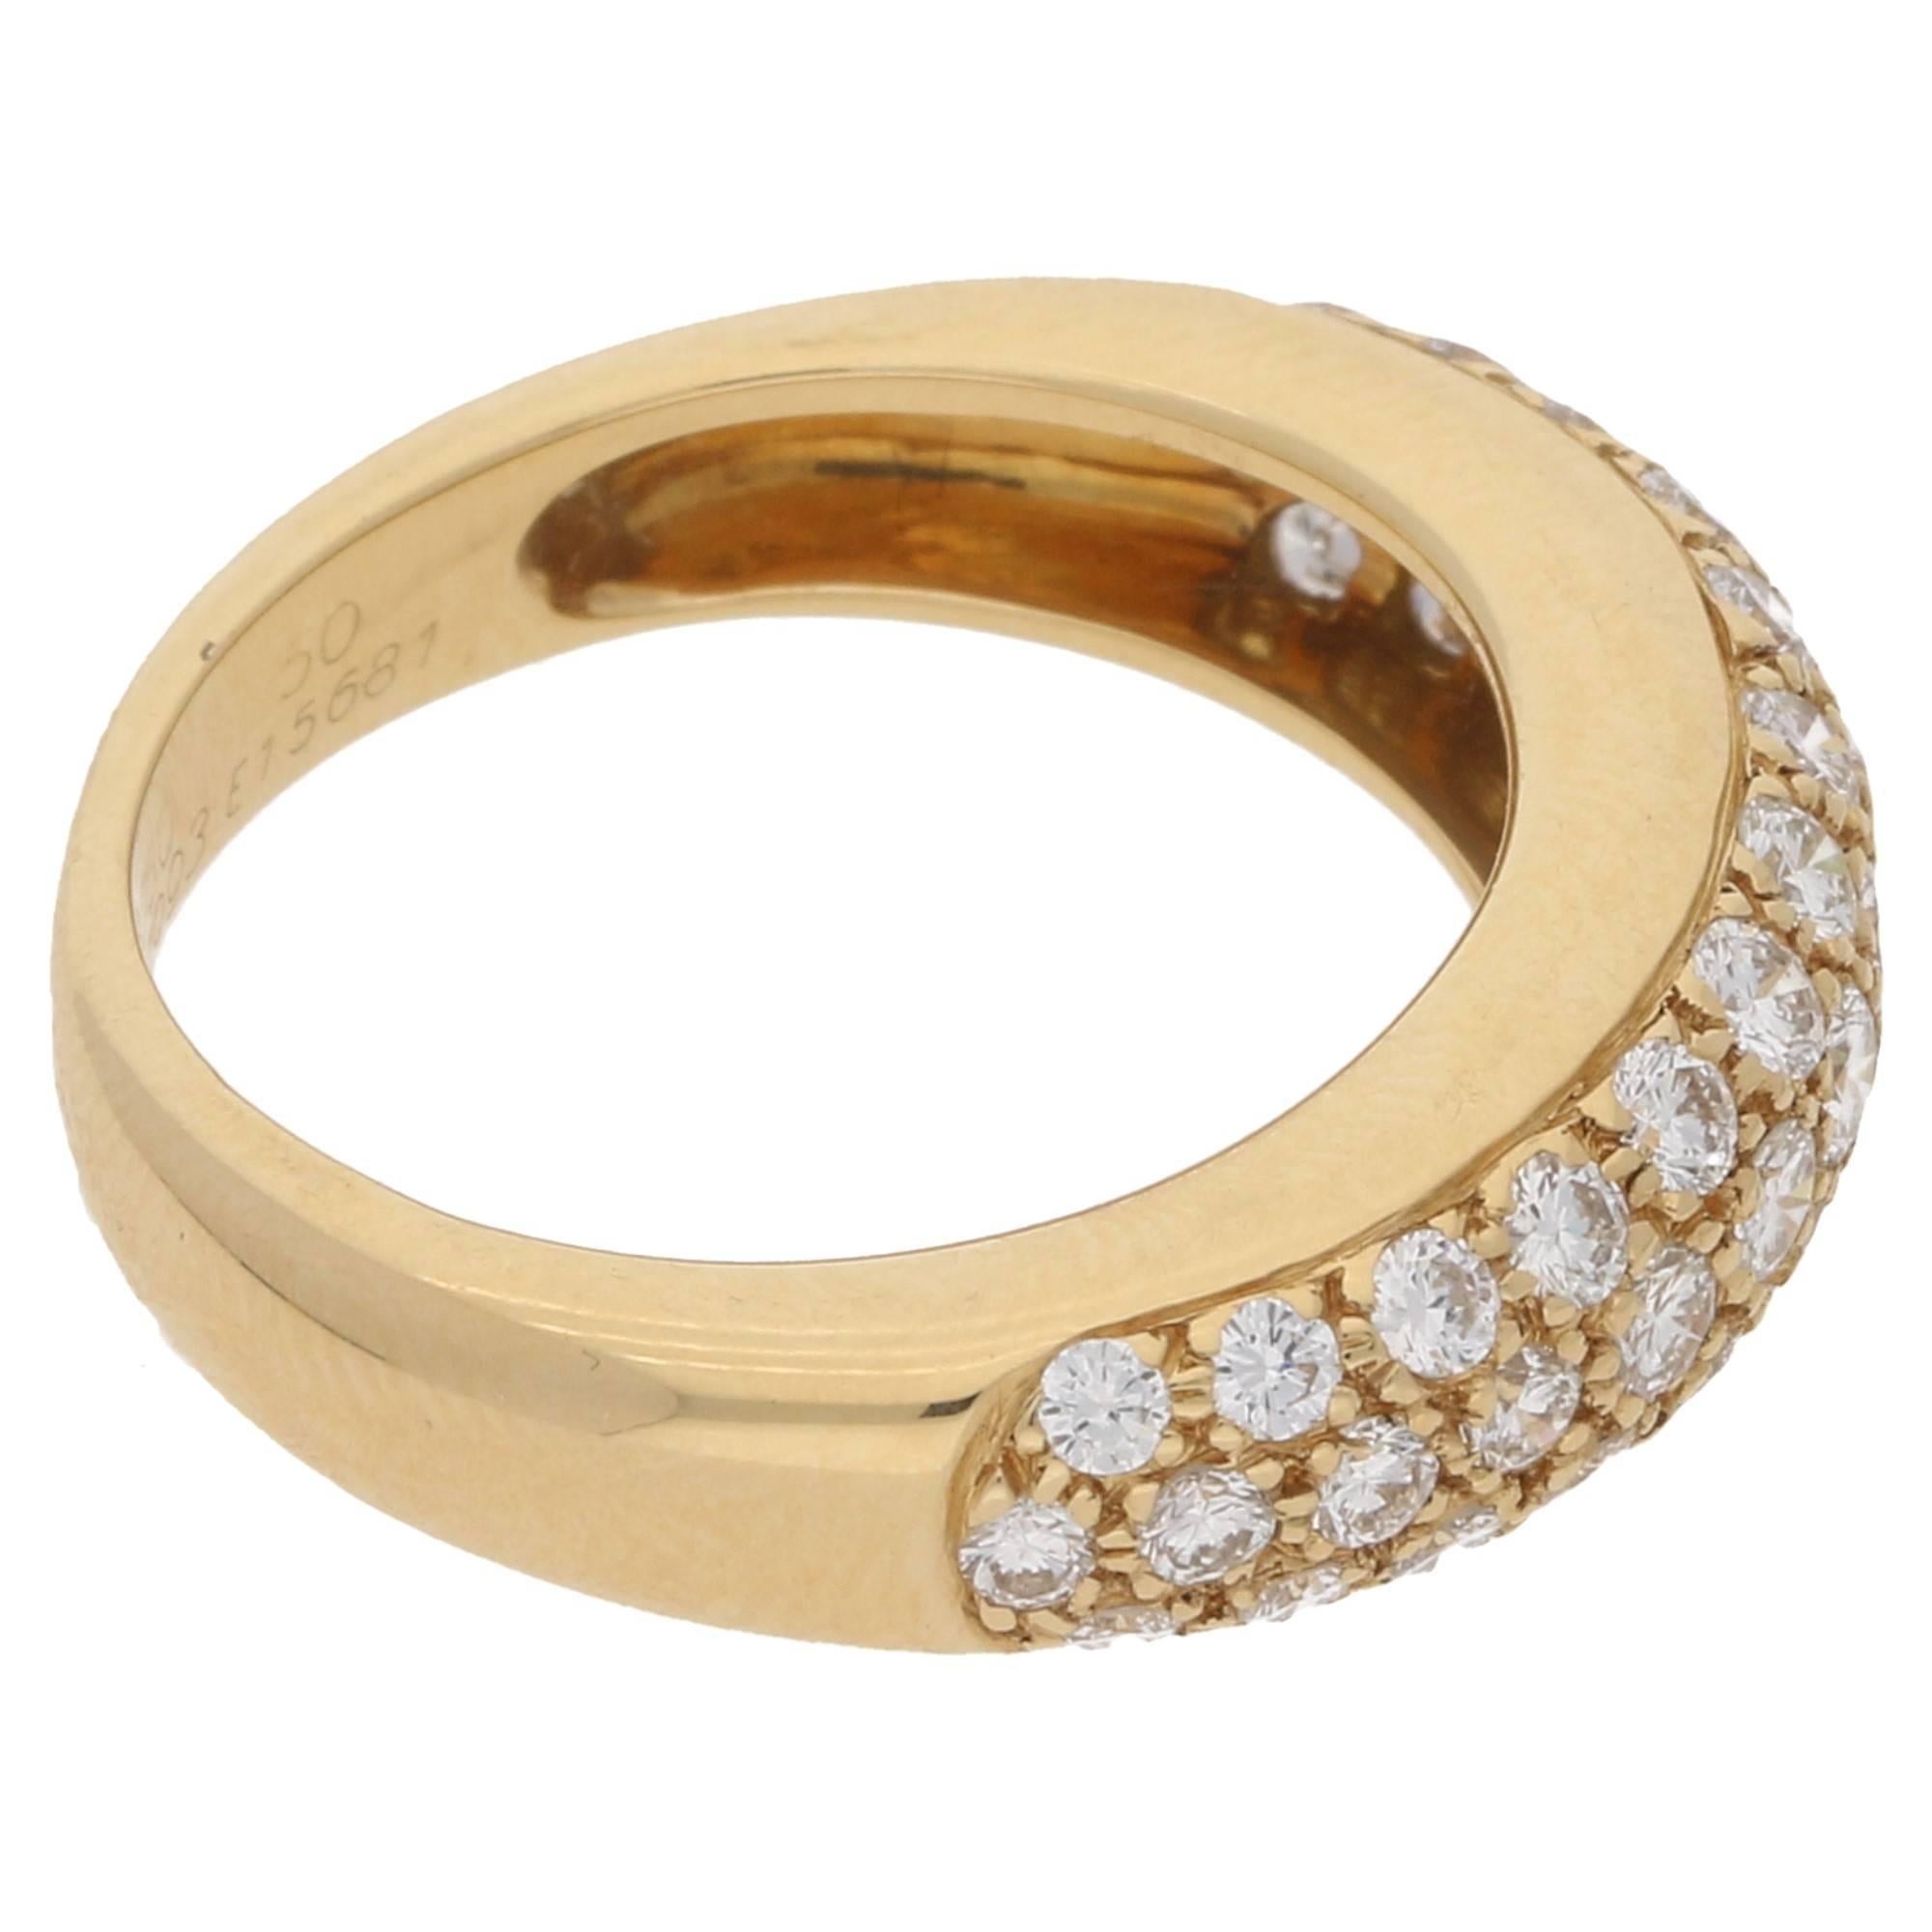 A classic Cartier Mimi Star ring set in 18k yellow gold. This piece is from the iconic Cartier Mimi collection - a successful collection that began in the 1990's and is still popular to this day! 

The is is half pavé set with approximately 1.30